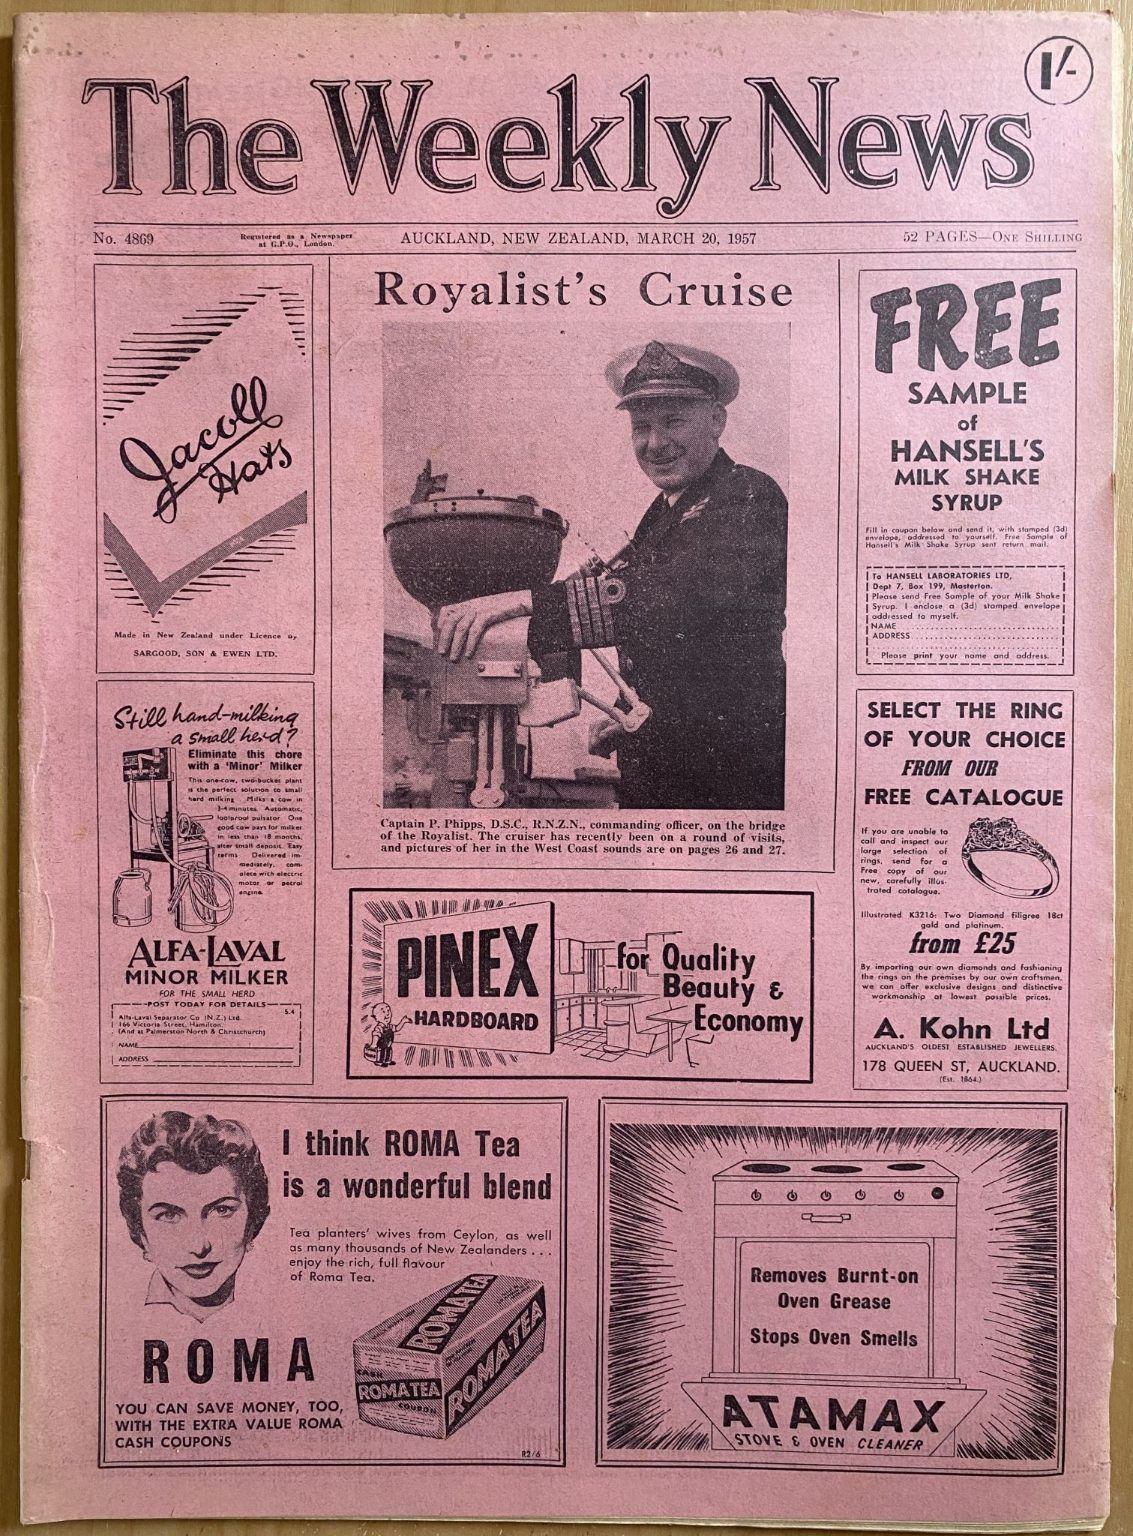 OLD NEWSPAPER: The Weekly News, No. 4869, 20 March 1957